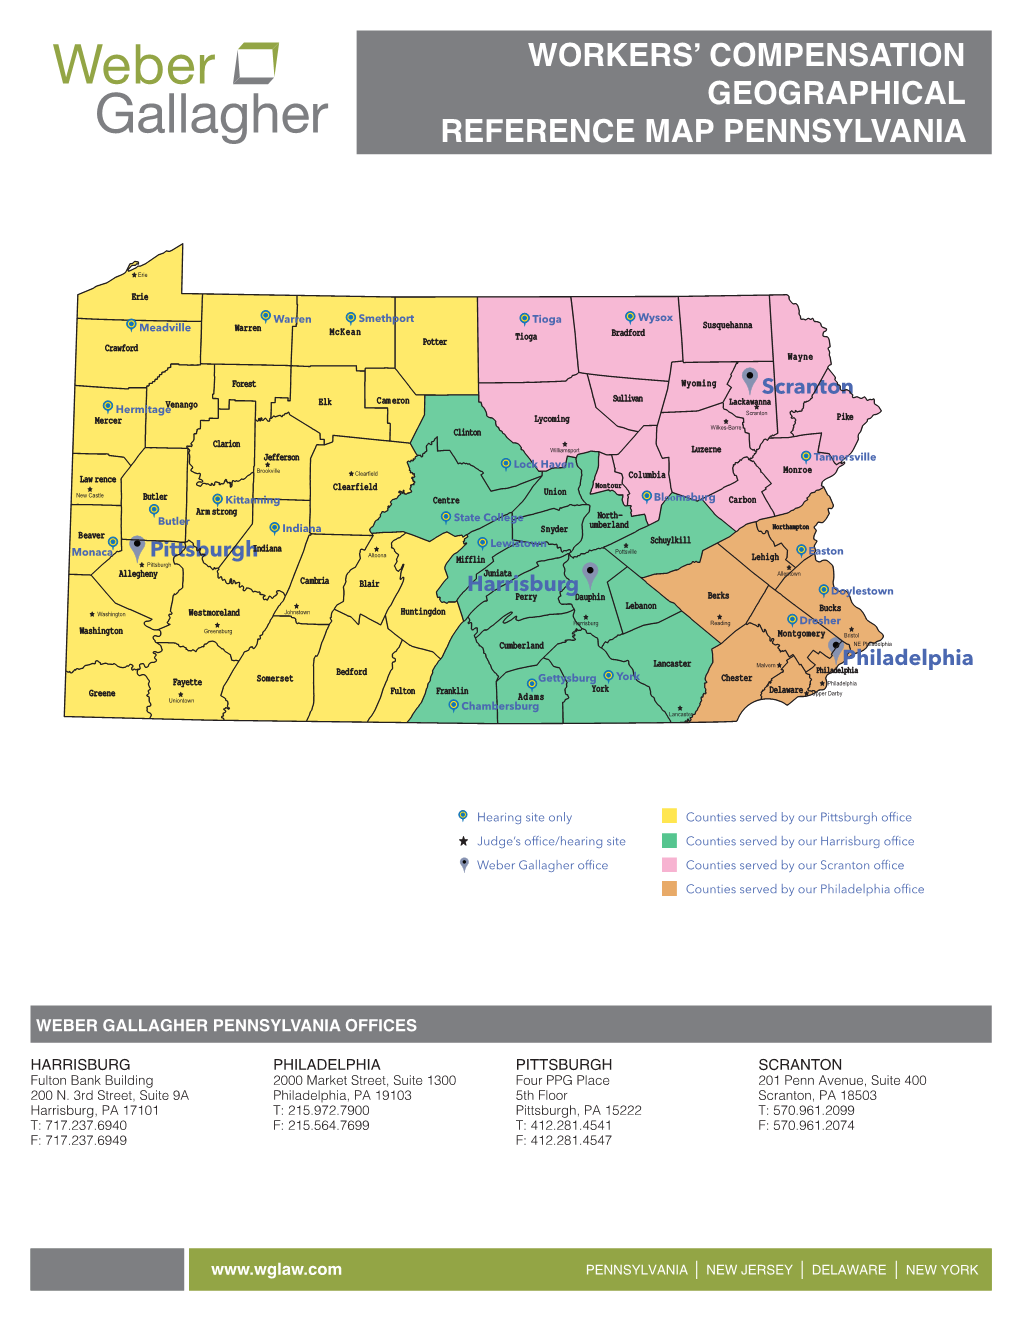 Workers' Compensation Geographical Reference